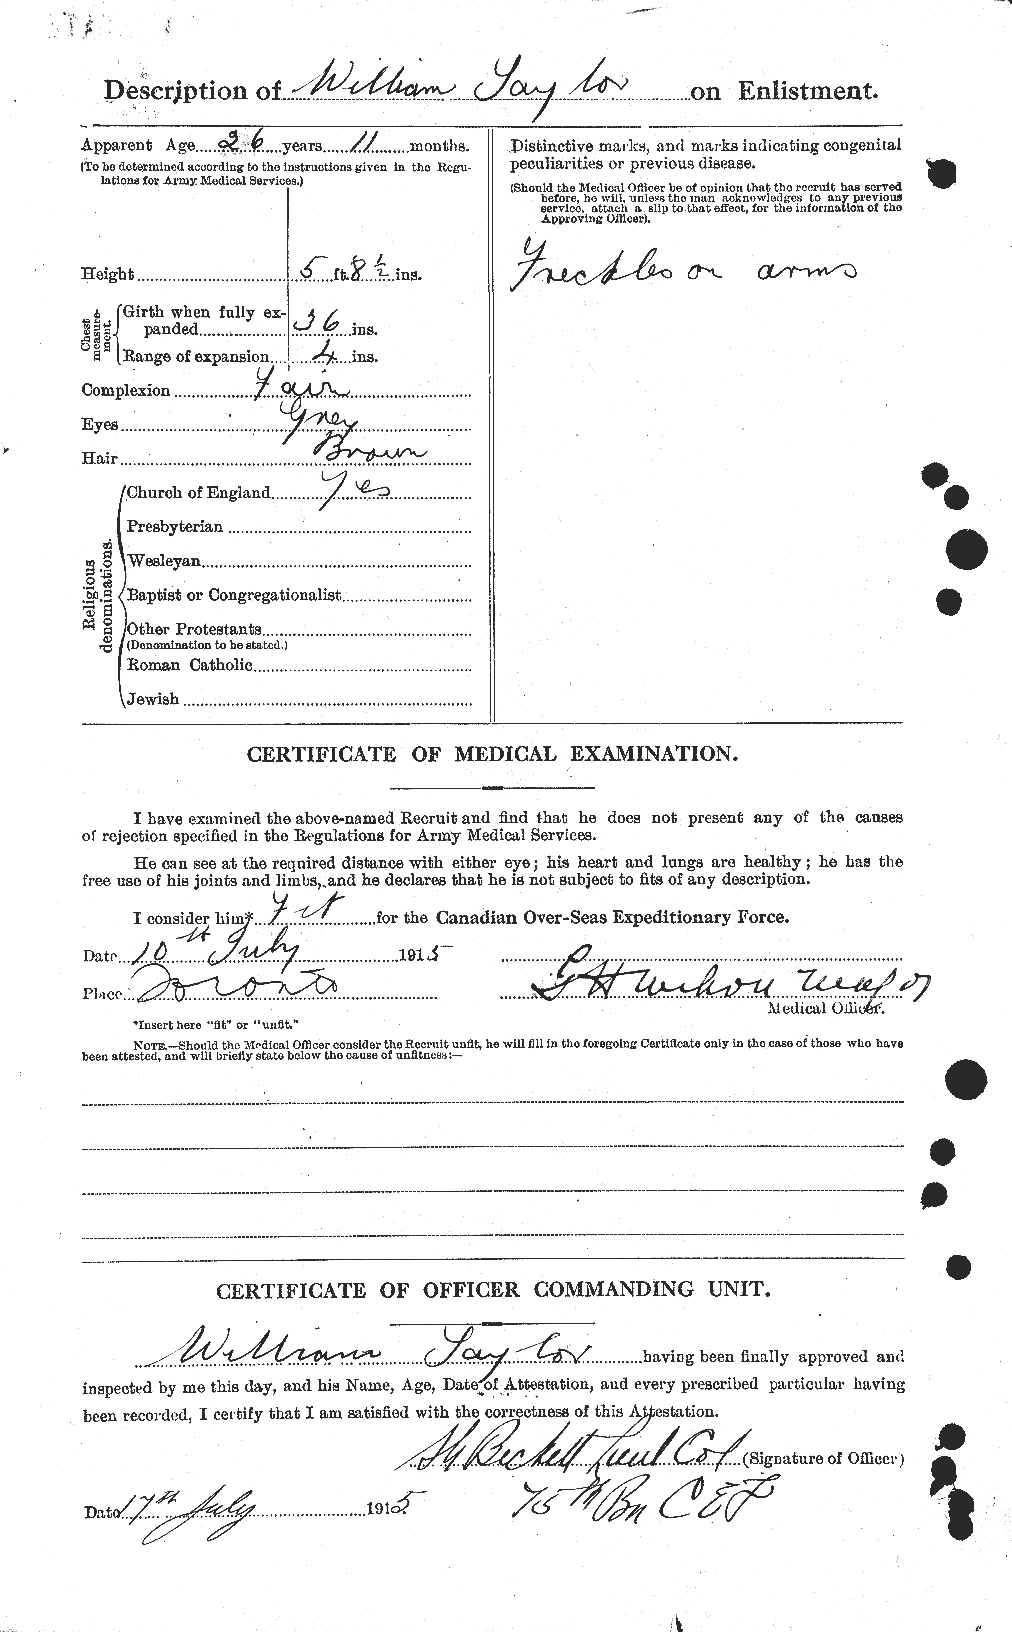 Personnel Records of the First World War - CEF 628100b